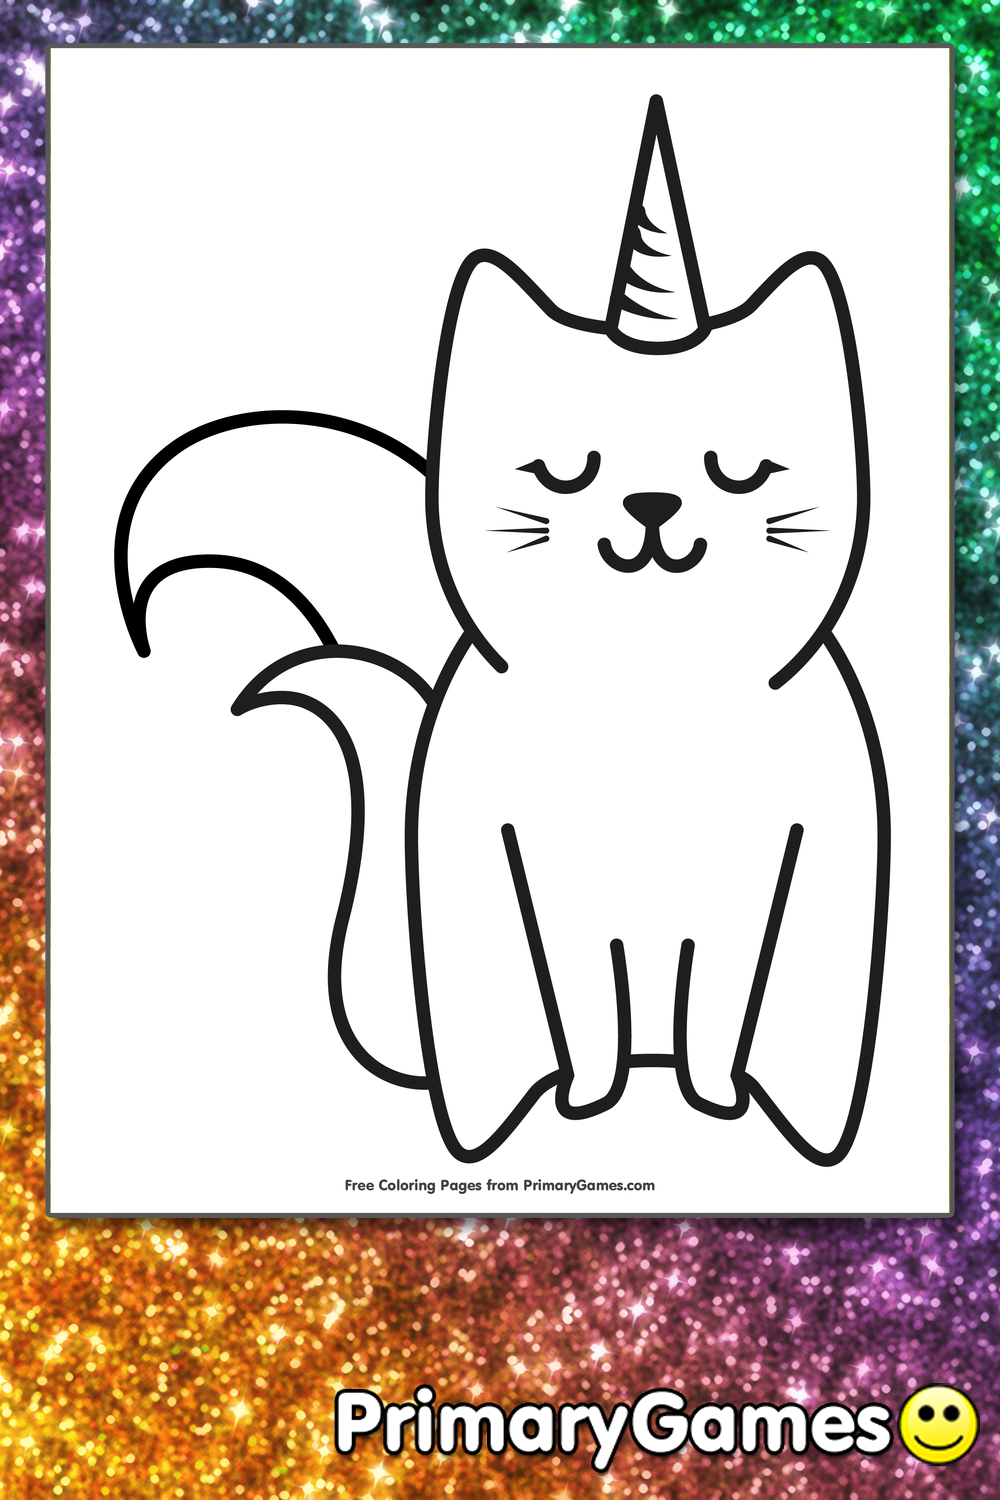 Caticorn Coloring Page Free Printable Pdf From Primarygames